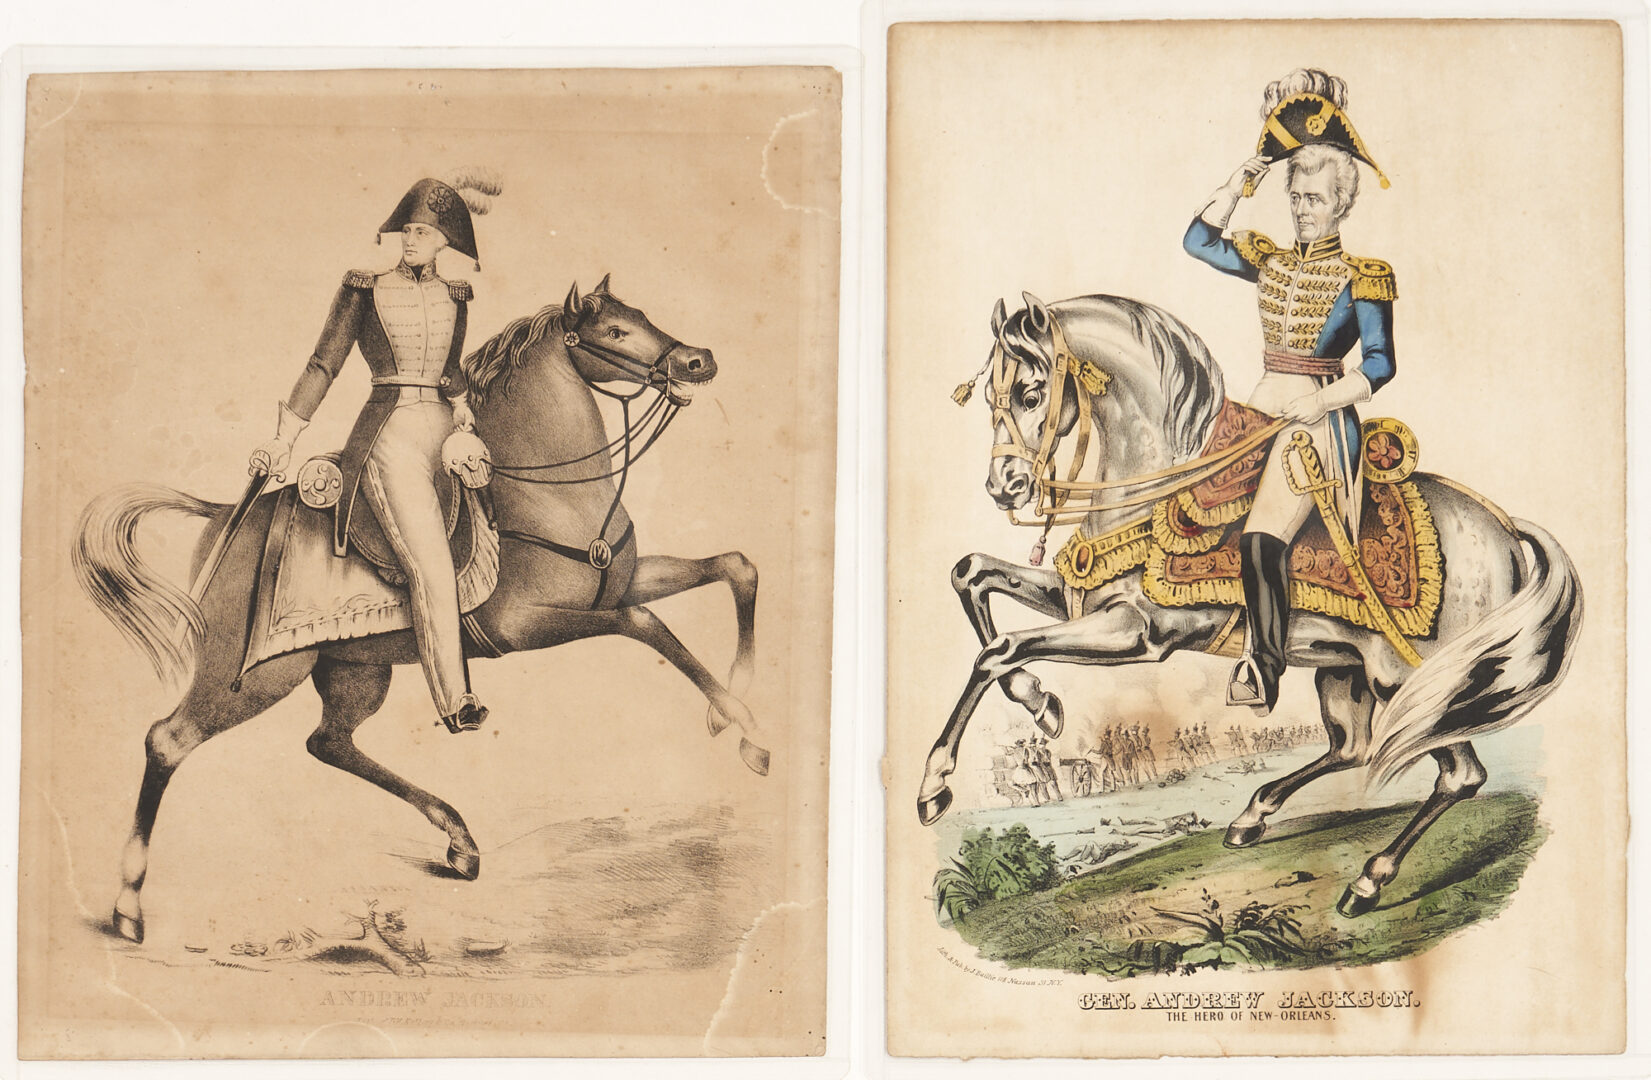 Lot 594: Group of 7 Andrew Jackson Prints by Kellogg, Currier and Harper's